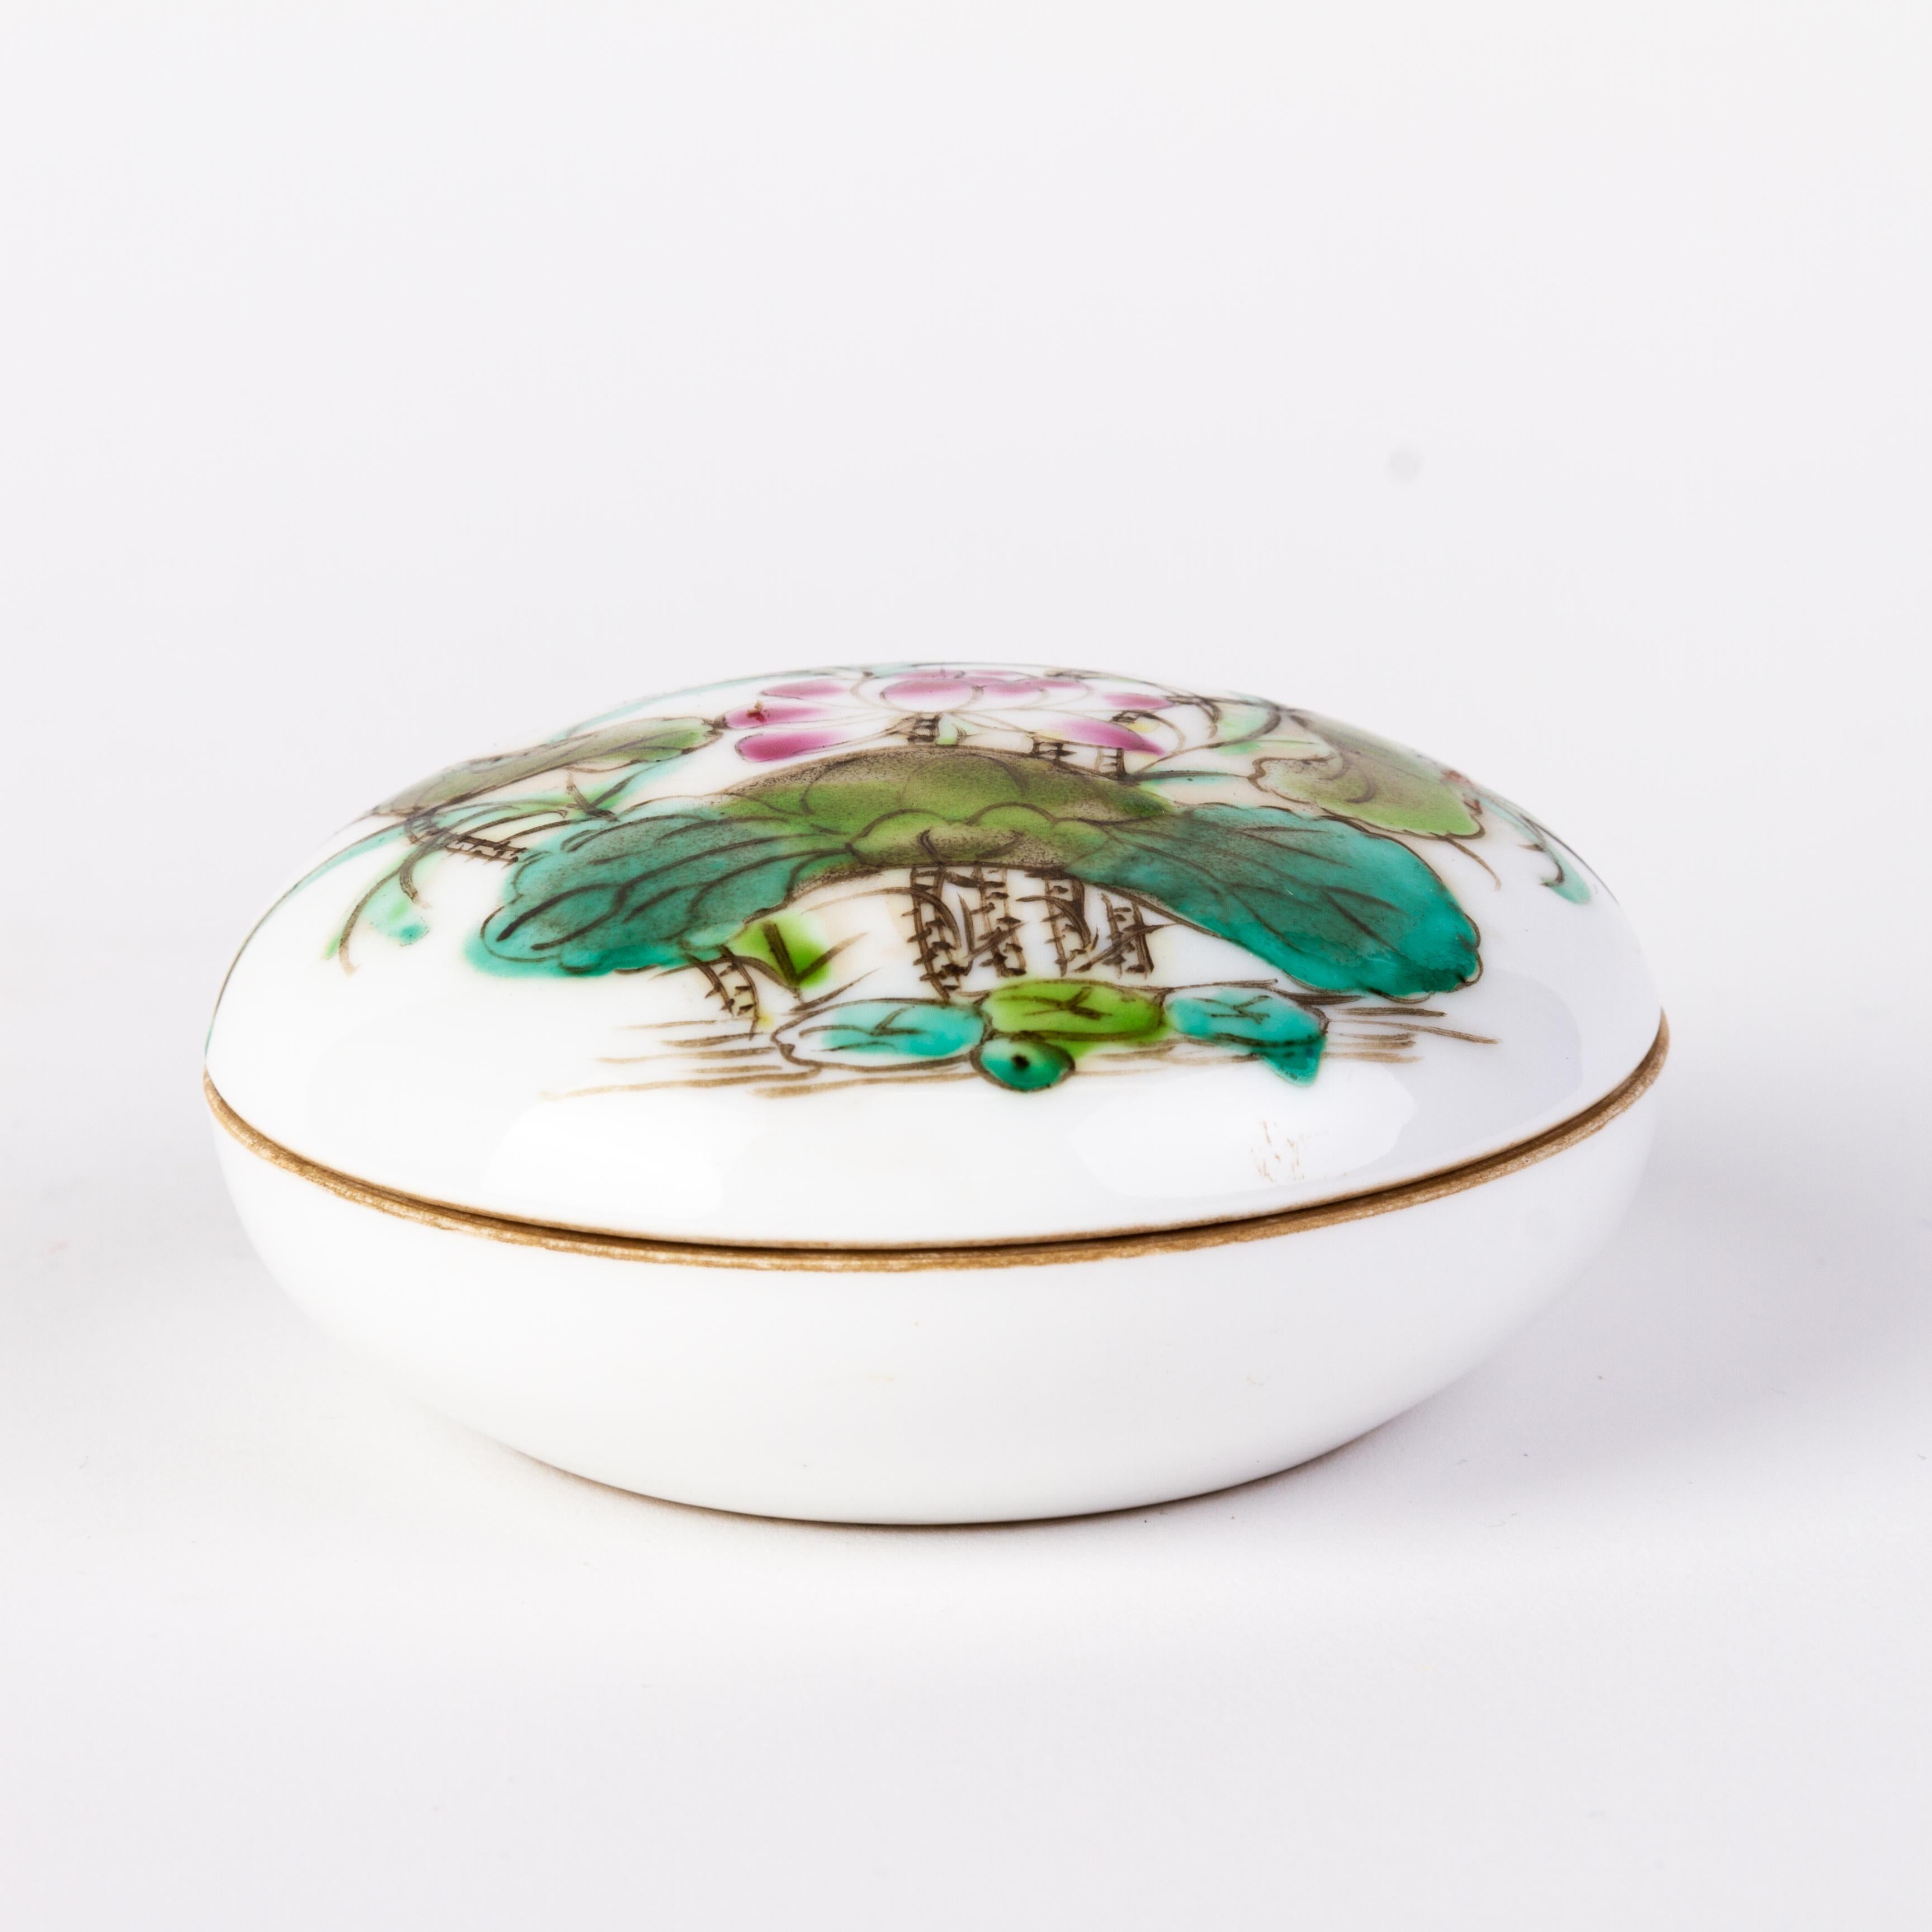 Chinese Republic Period Famille Rose Porcelain Lidded Box with Seal Mark 3